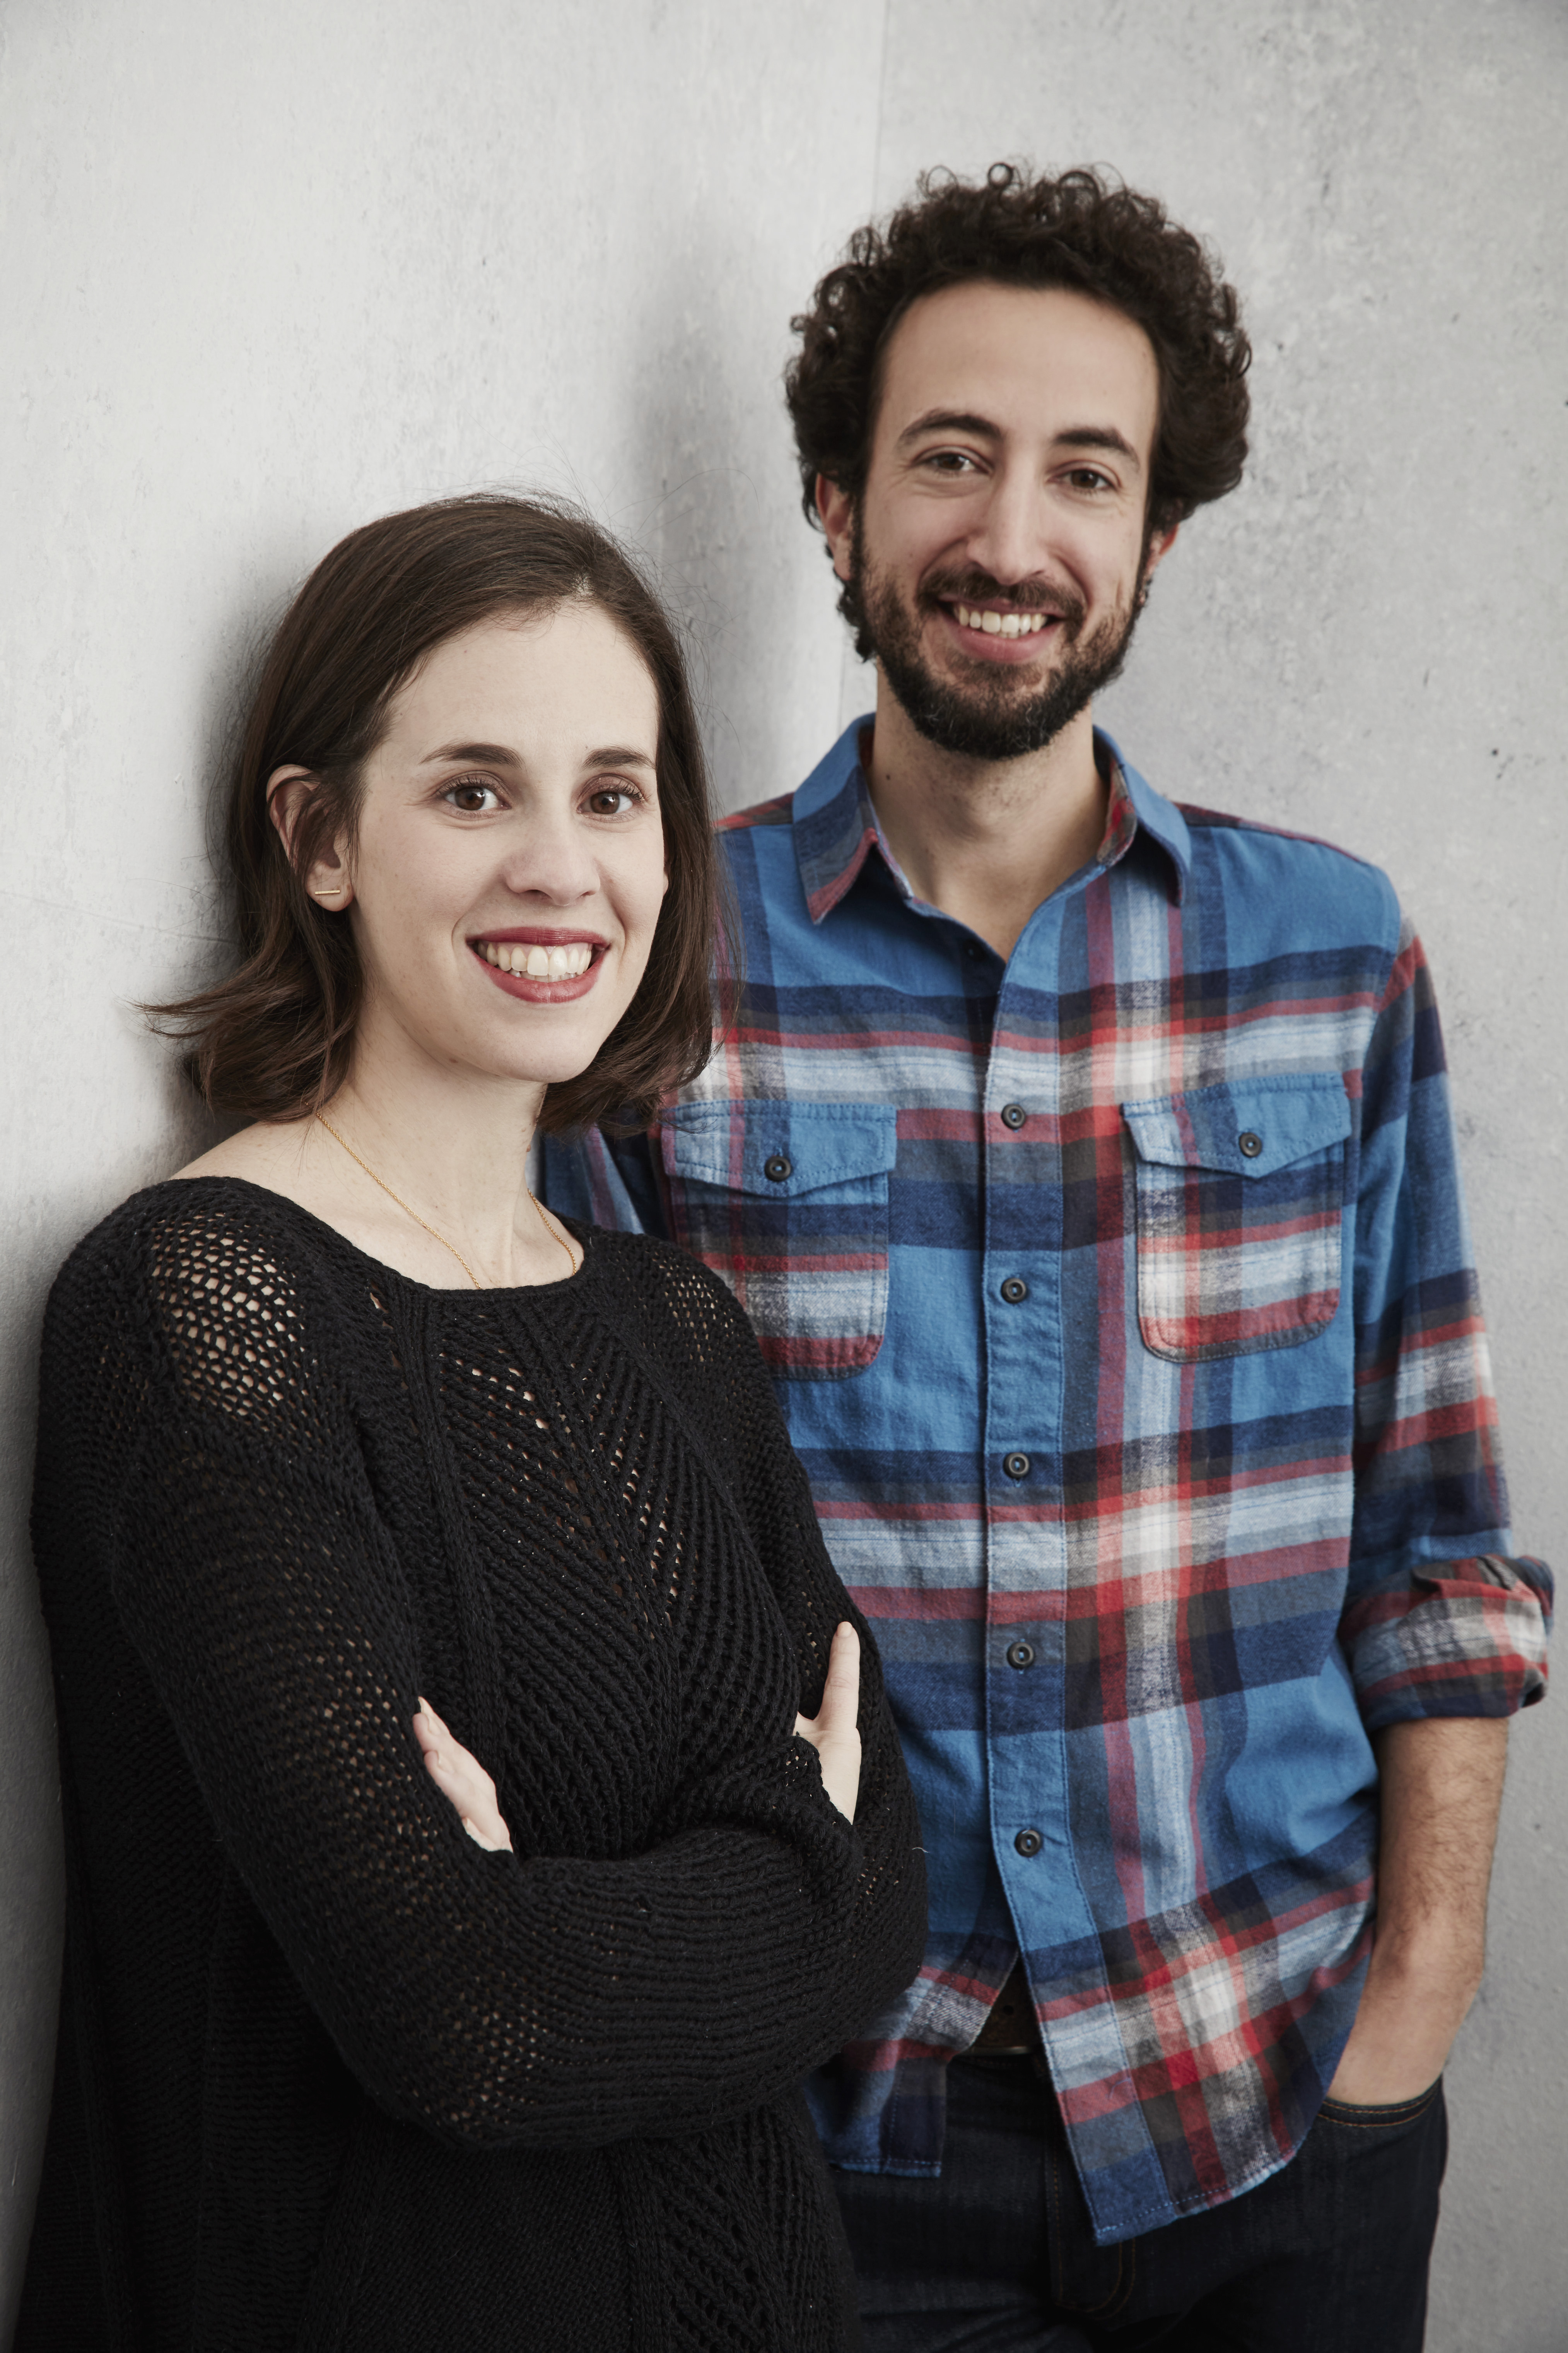 Elyse Steinberg and Josh Kriegman from the film 'Weiner' pose at the 2016 Sundance Film Festival Getty Images Portrait Studio on January 25, 2016 in Park City, Utah.